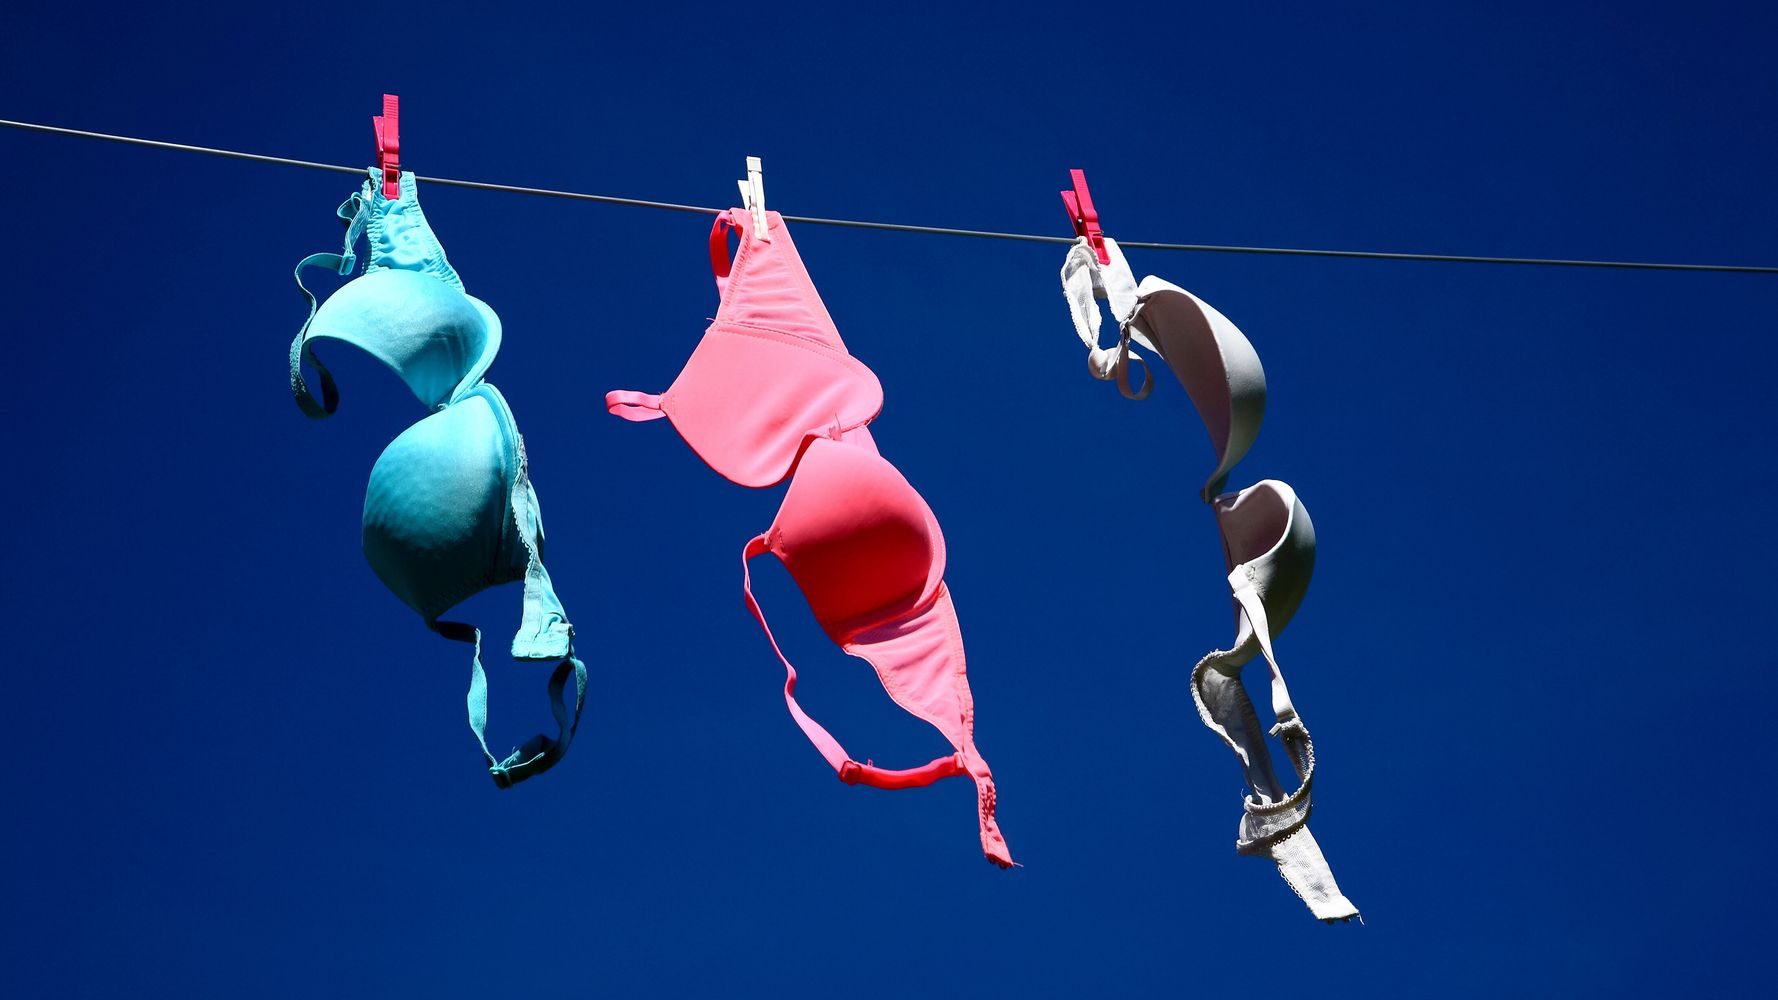 How Many Bras Should You Have?